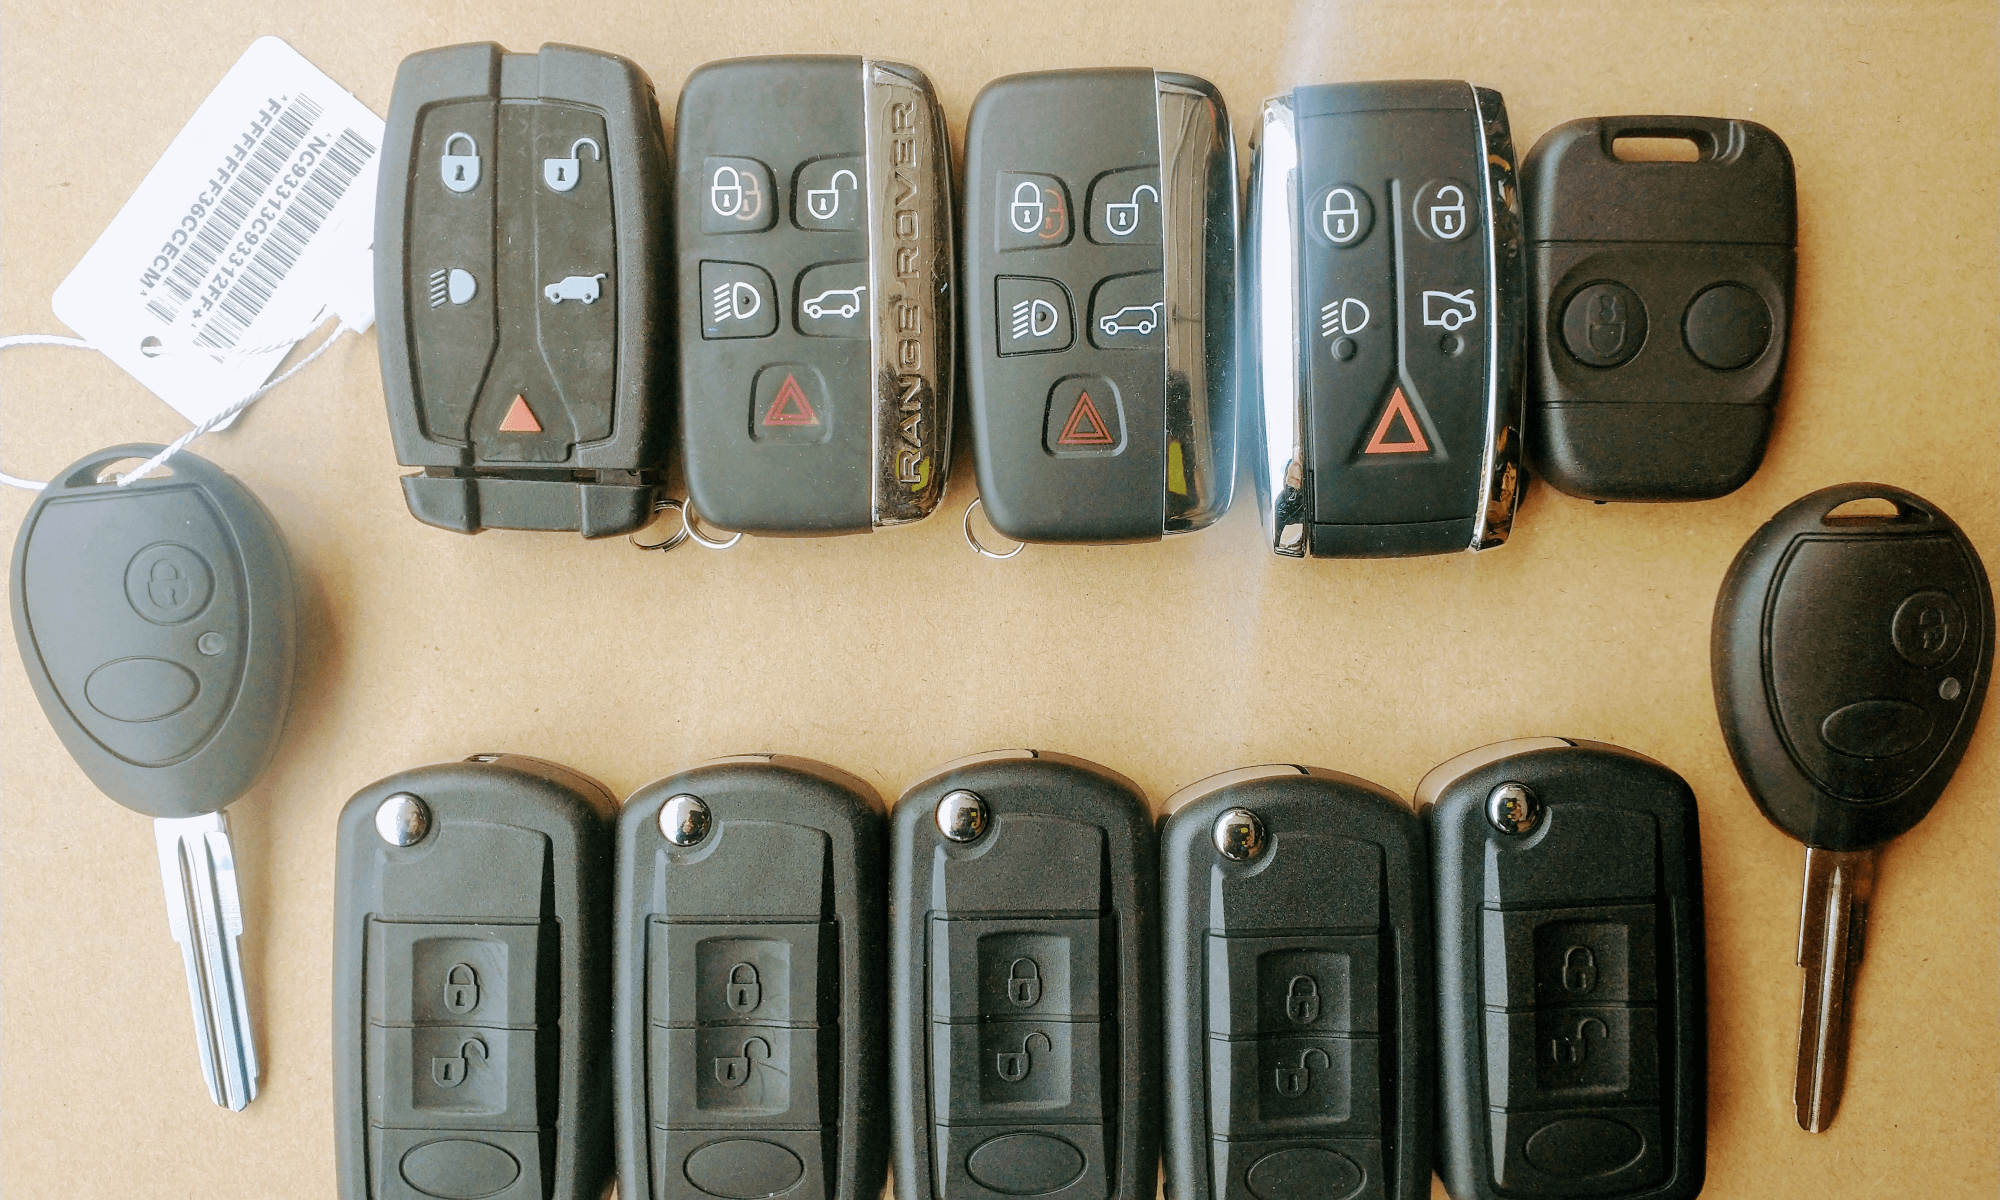 Range Rover and Land Rover compatible remotes